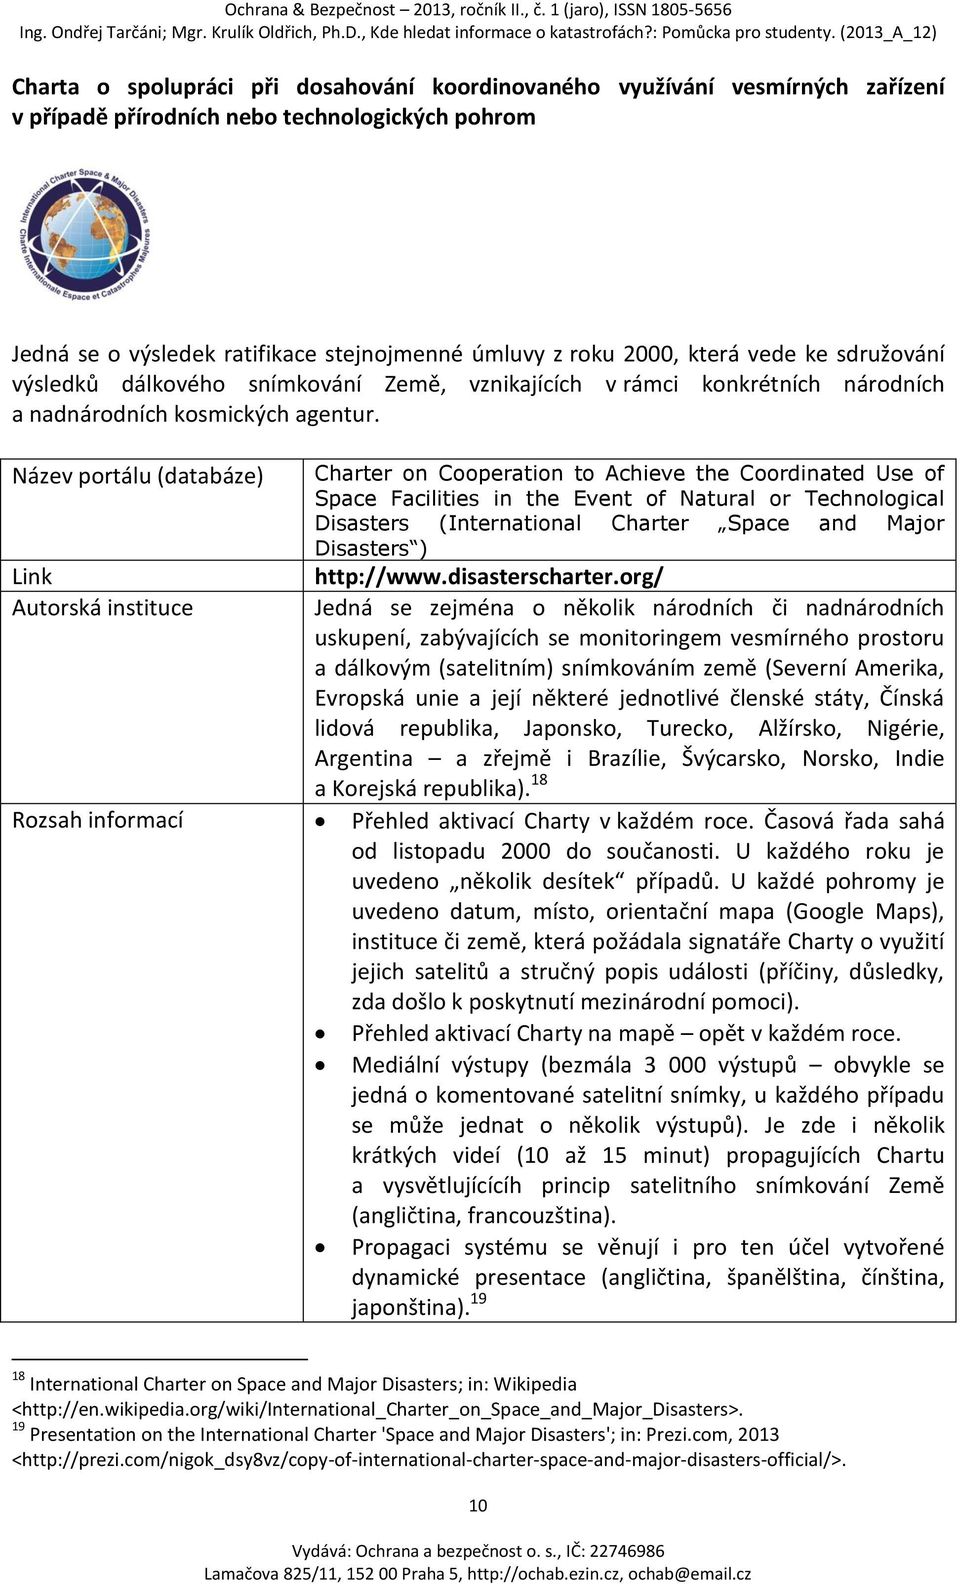 Název portálu (databáze) Charter on Cooperation to Achieve the Coordinated Use of Space Facilities in the Event of Natural or Technological Disasters (International Charter Space and Major Disasters